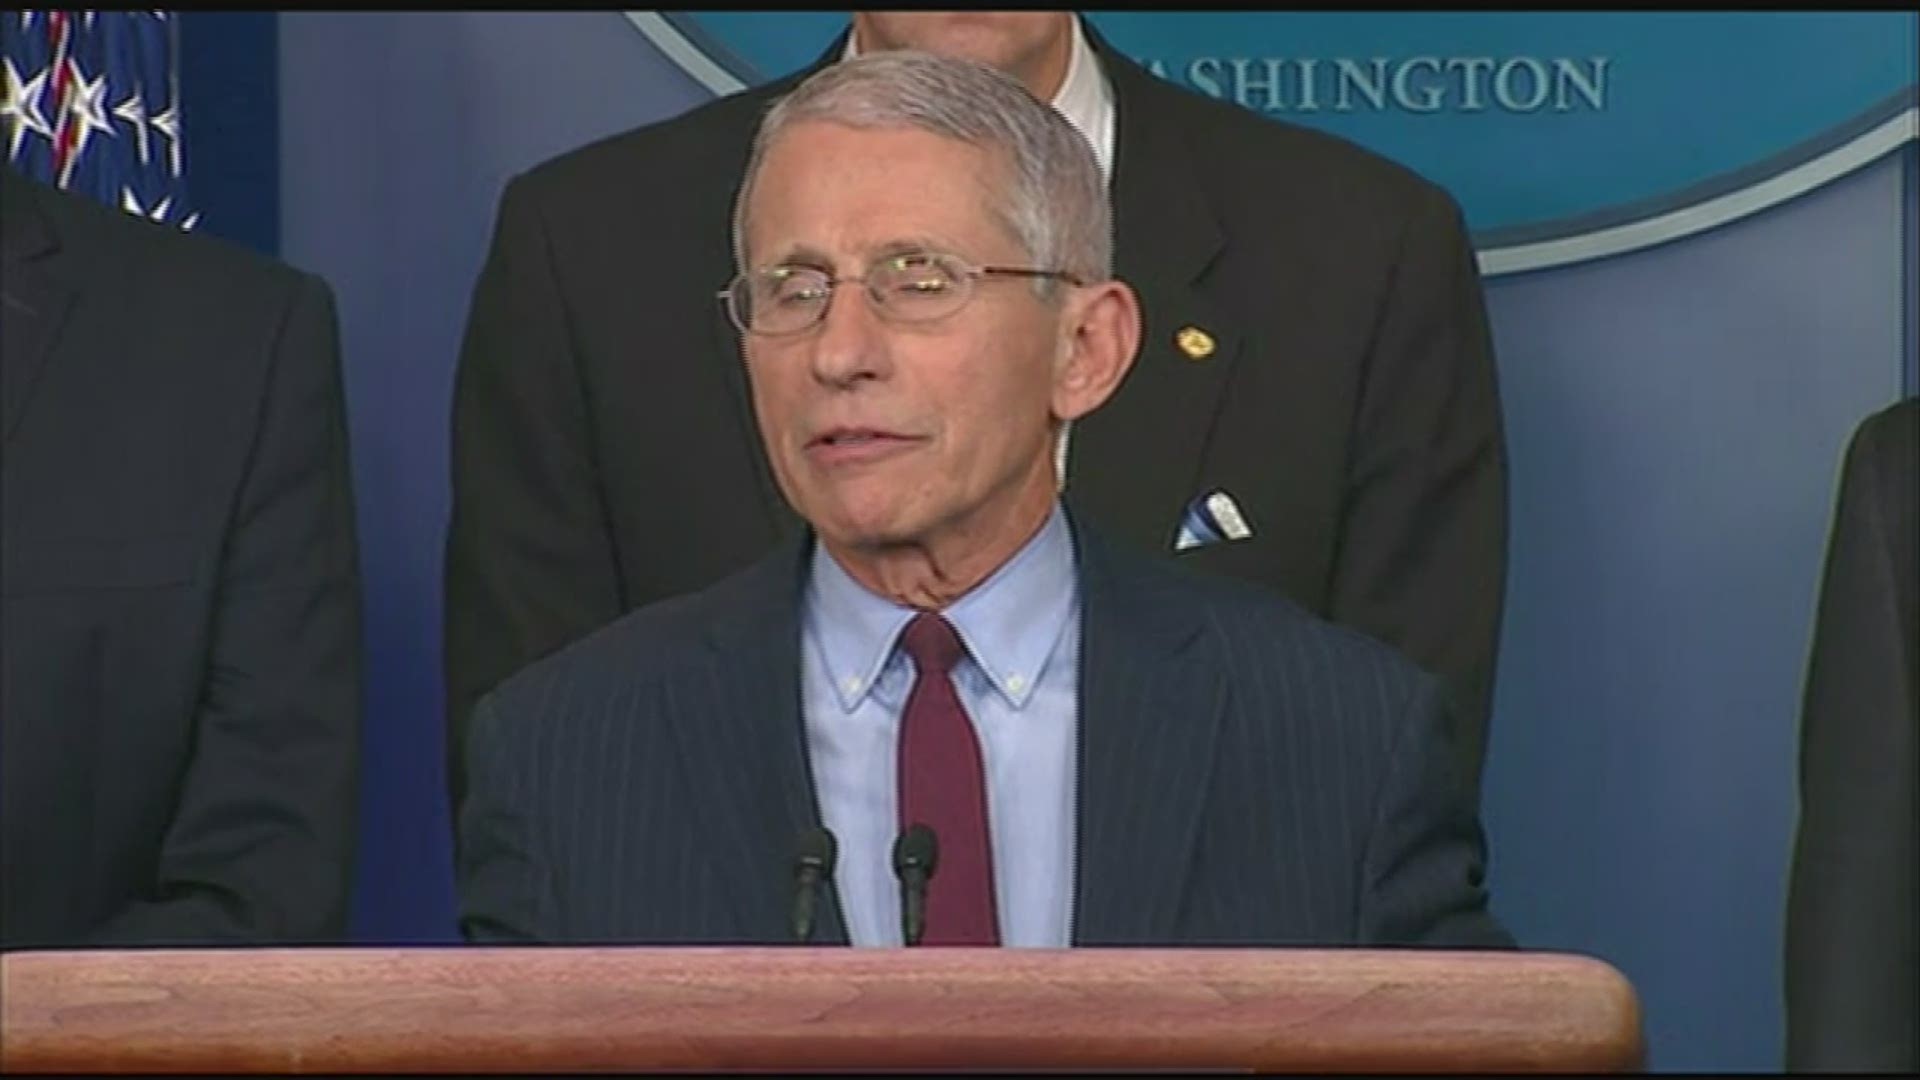 Dr. Anthony Fauci says the number of unknown aspects of the coronavirus raise the public health concern.